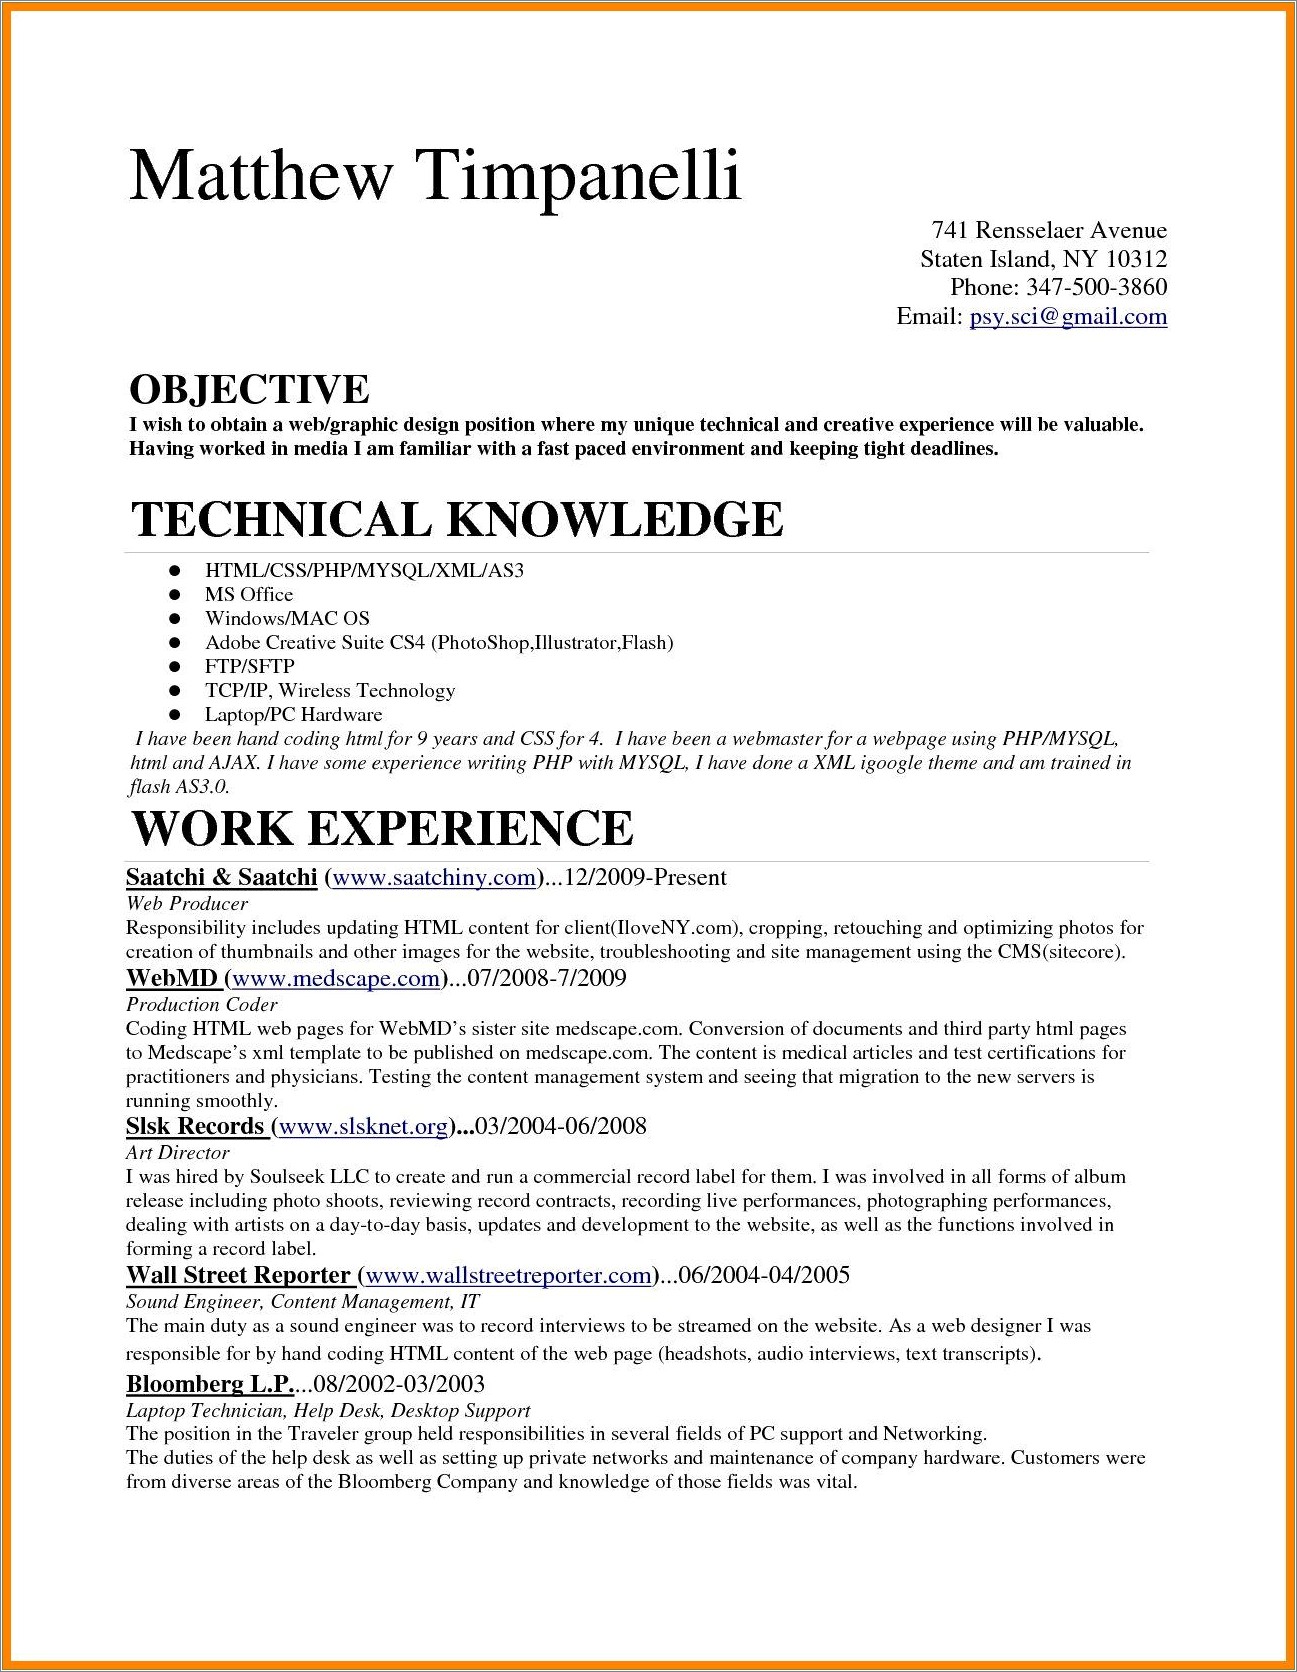 Free Sample Resume For Medical Billing And Coding